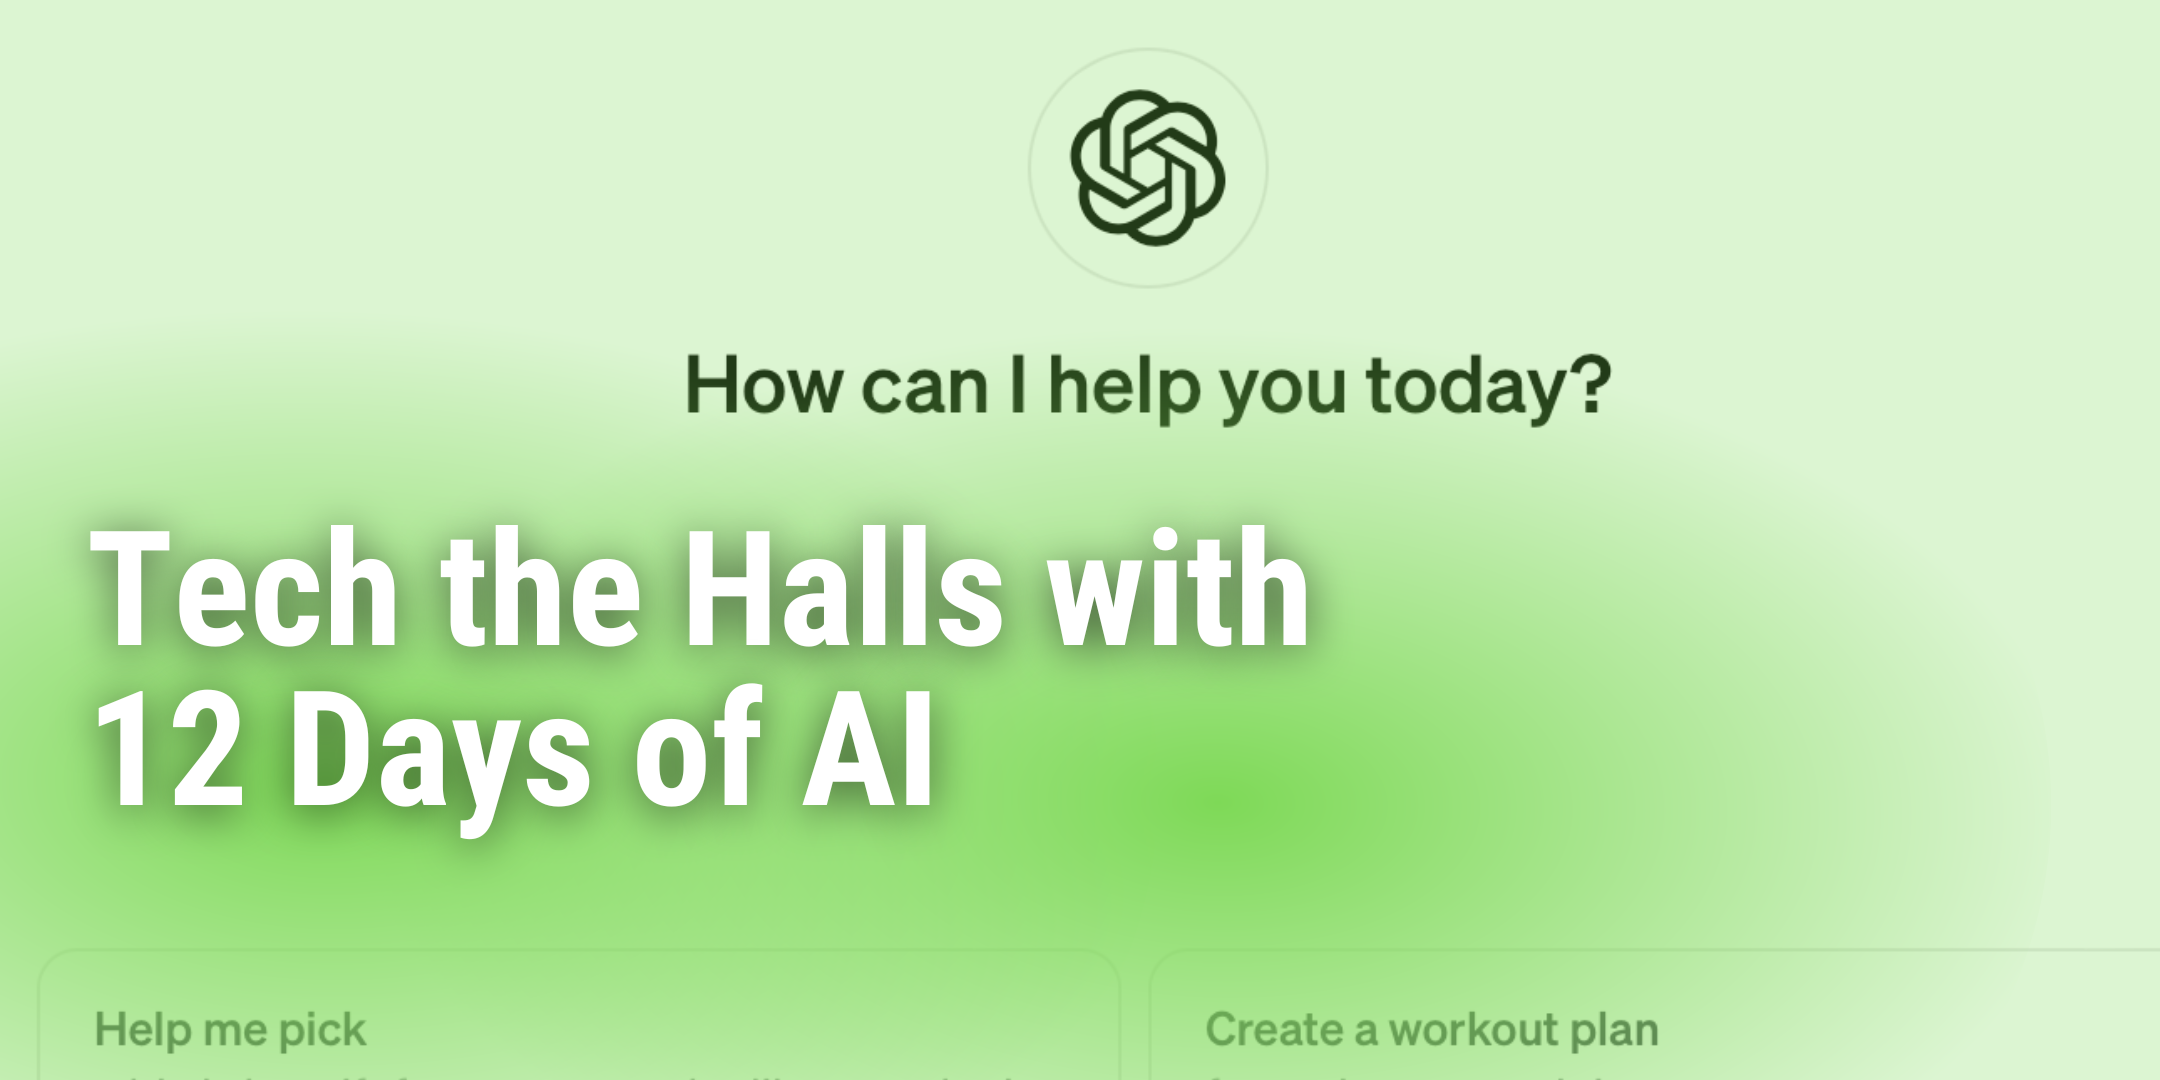 Green banner featuring a screenshot of the ChatGPT interface with the blog title 'Tech the Halls with 12 Days of AI' prominently displayed.